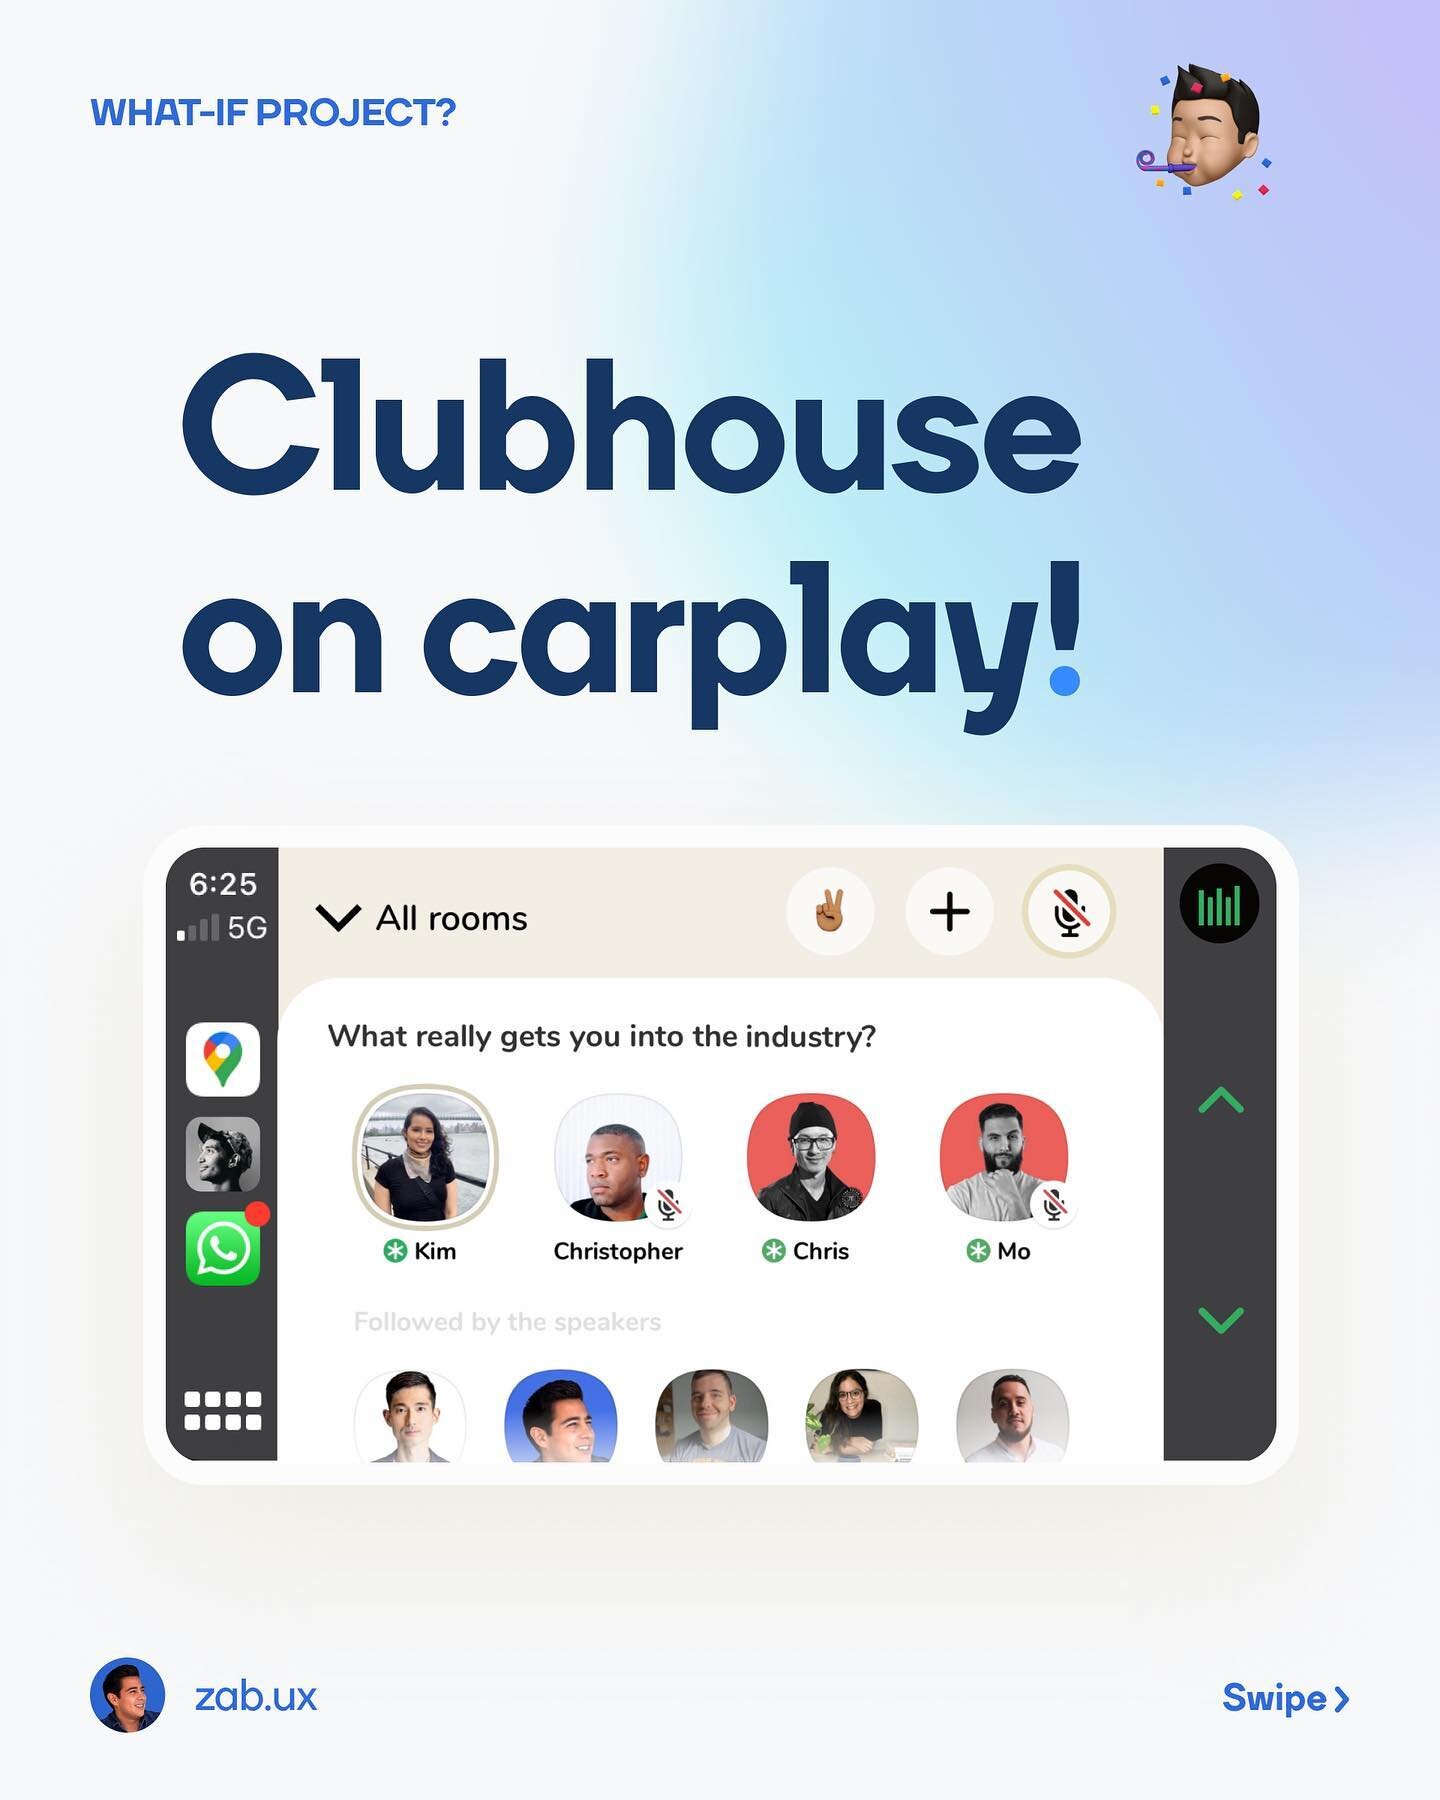 Sooo Ive been thinking about what would Clubhouse experience be in apple CarPlay🤔 well here its a quick attempt. If you are a designer  the conversations happening on @joinclubhouse.app have been amazing lately.
.
.
#applecarplay #clubhouseapp #club